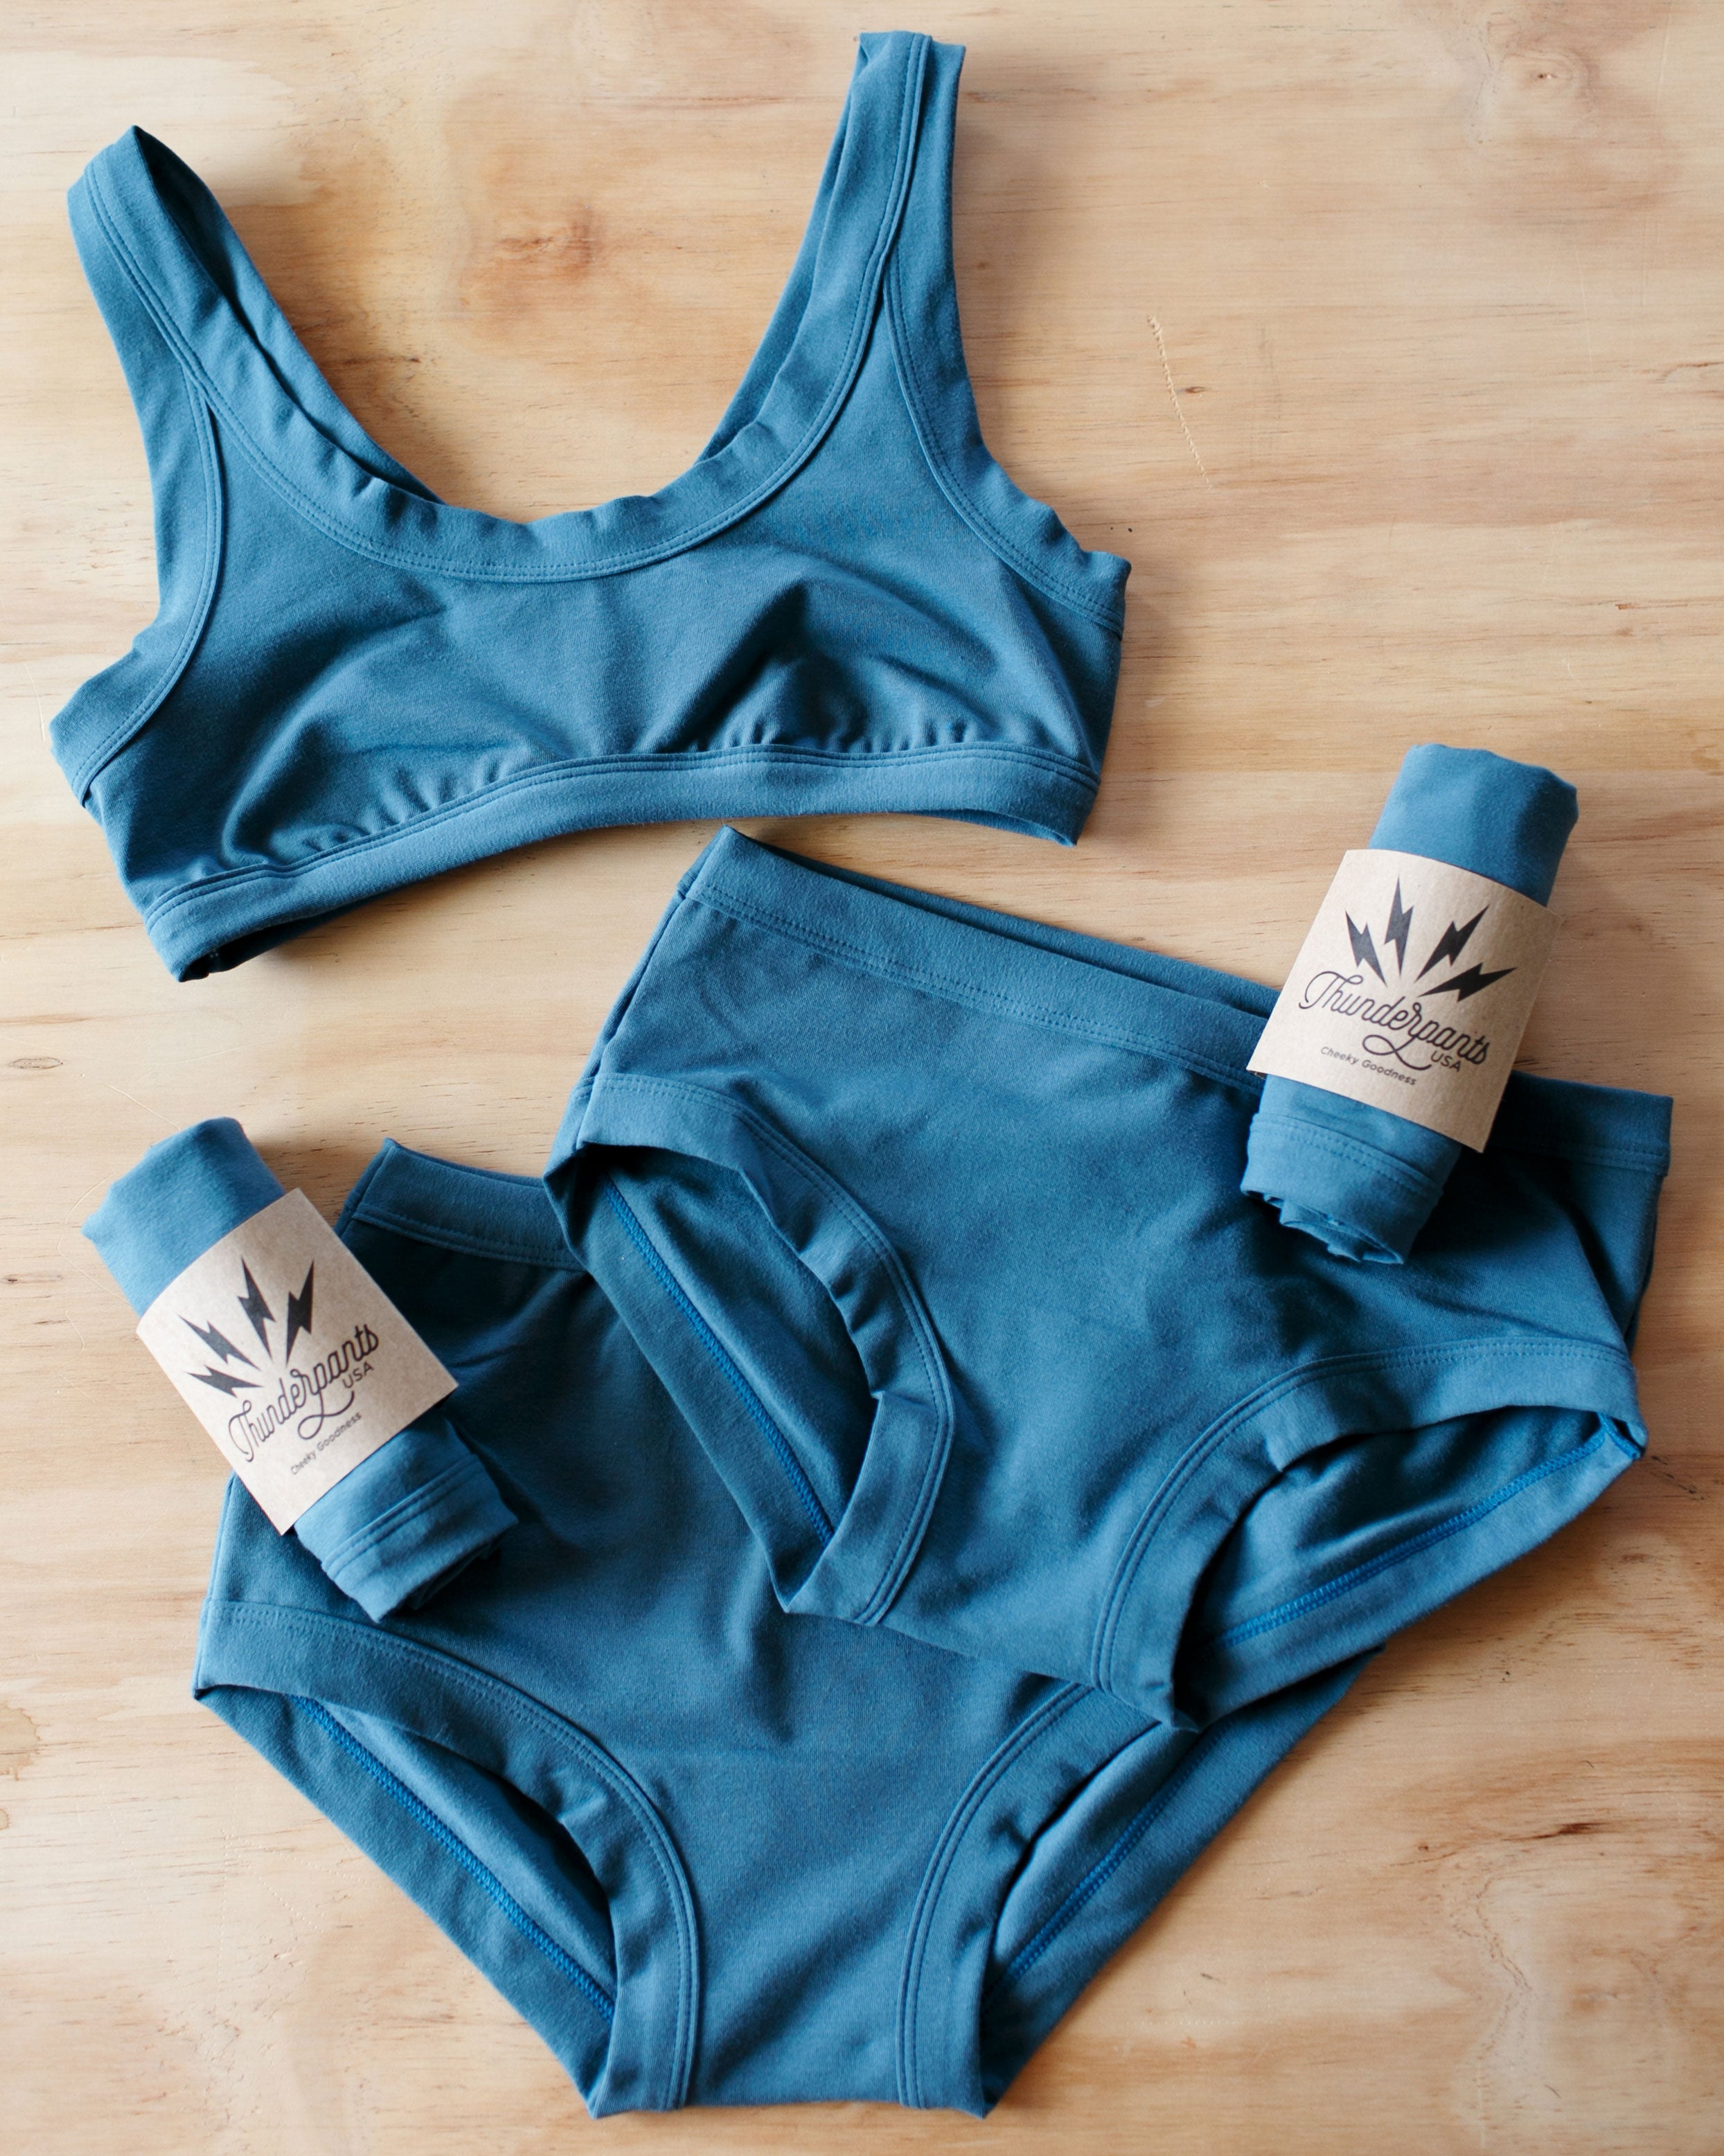 Flat lay of Thunderpants Organic Cotton Bralette, Hipster style and Original style underwear with packaged underwear in Stormy Blue color.